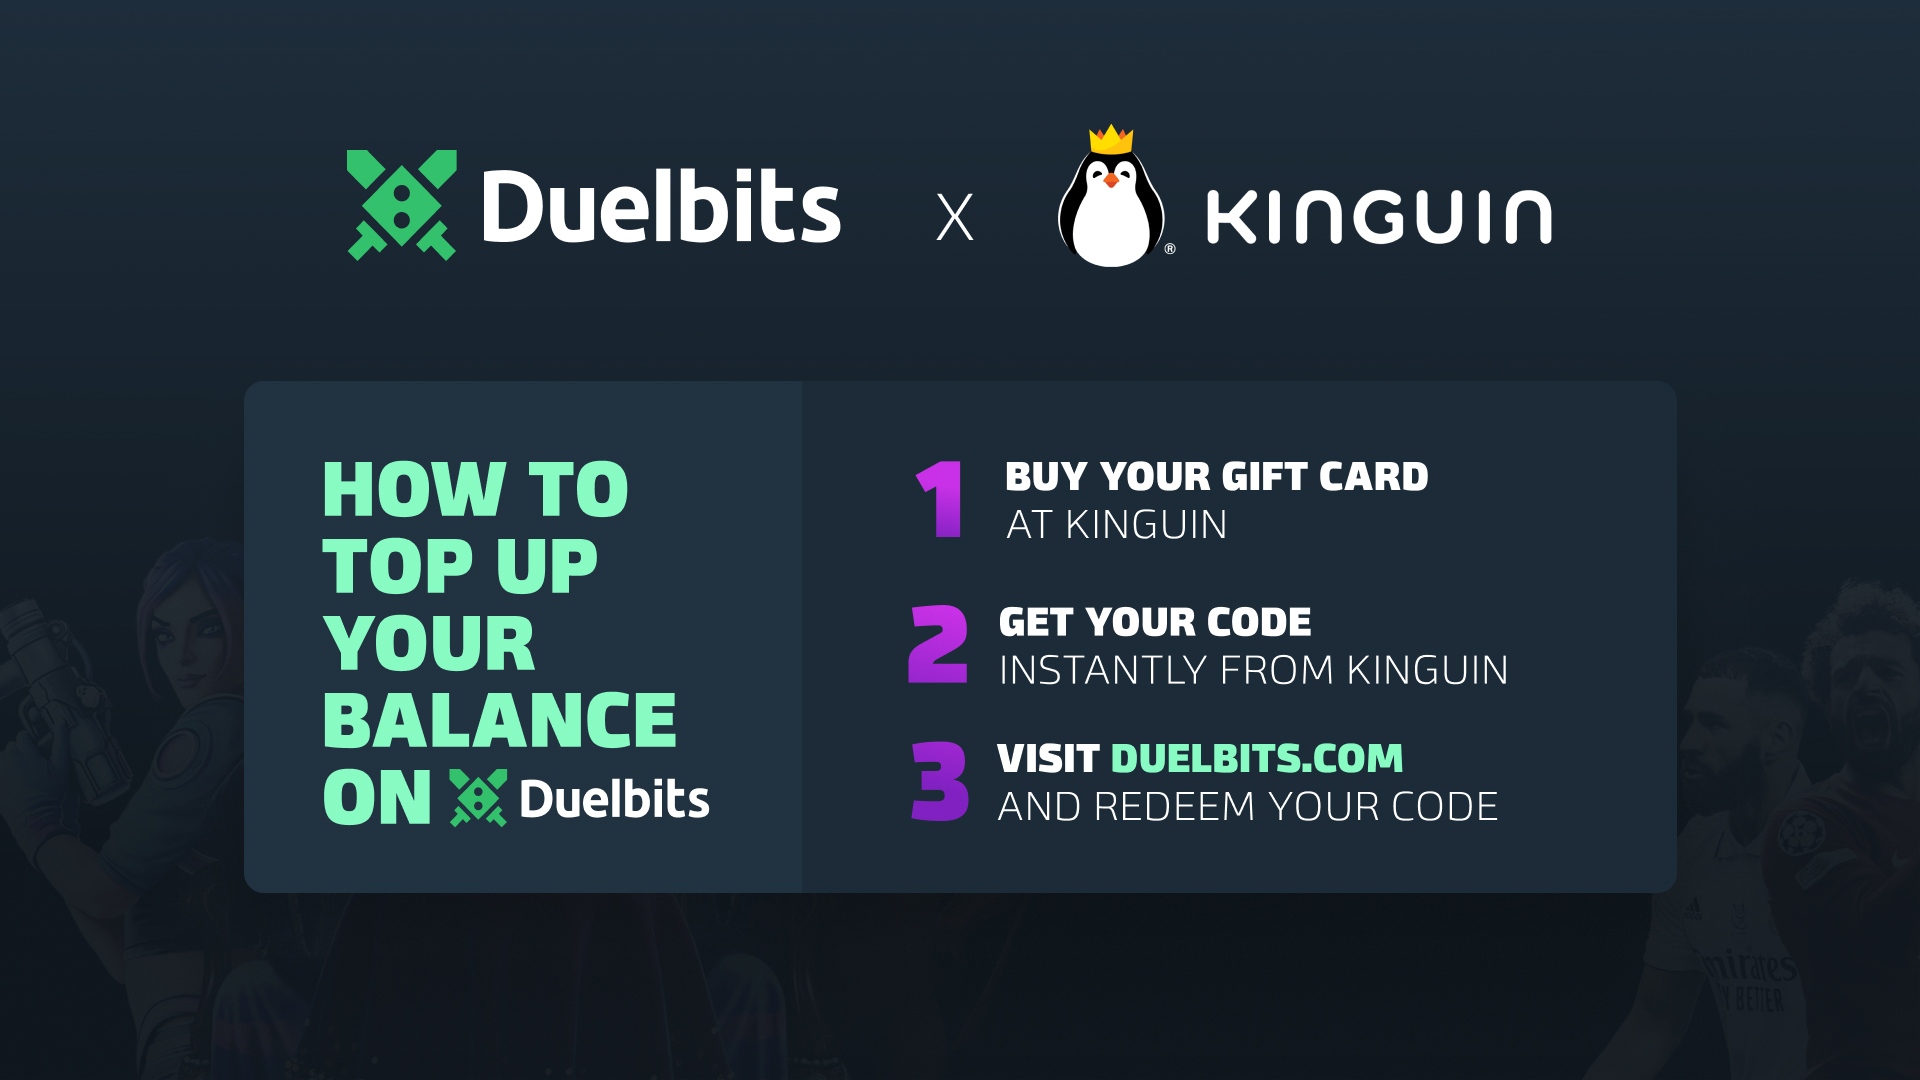 DuelBits $5 Gift Card 6.27$